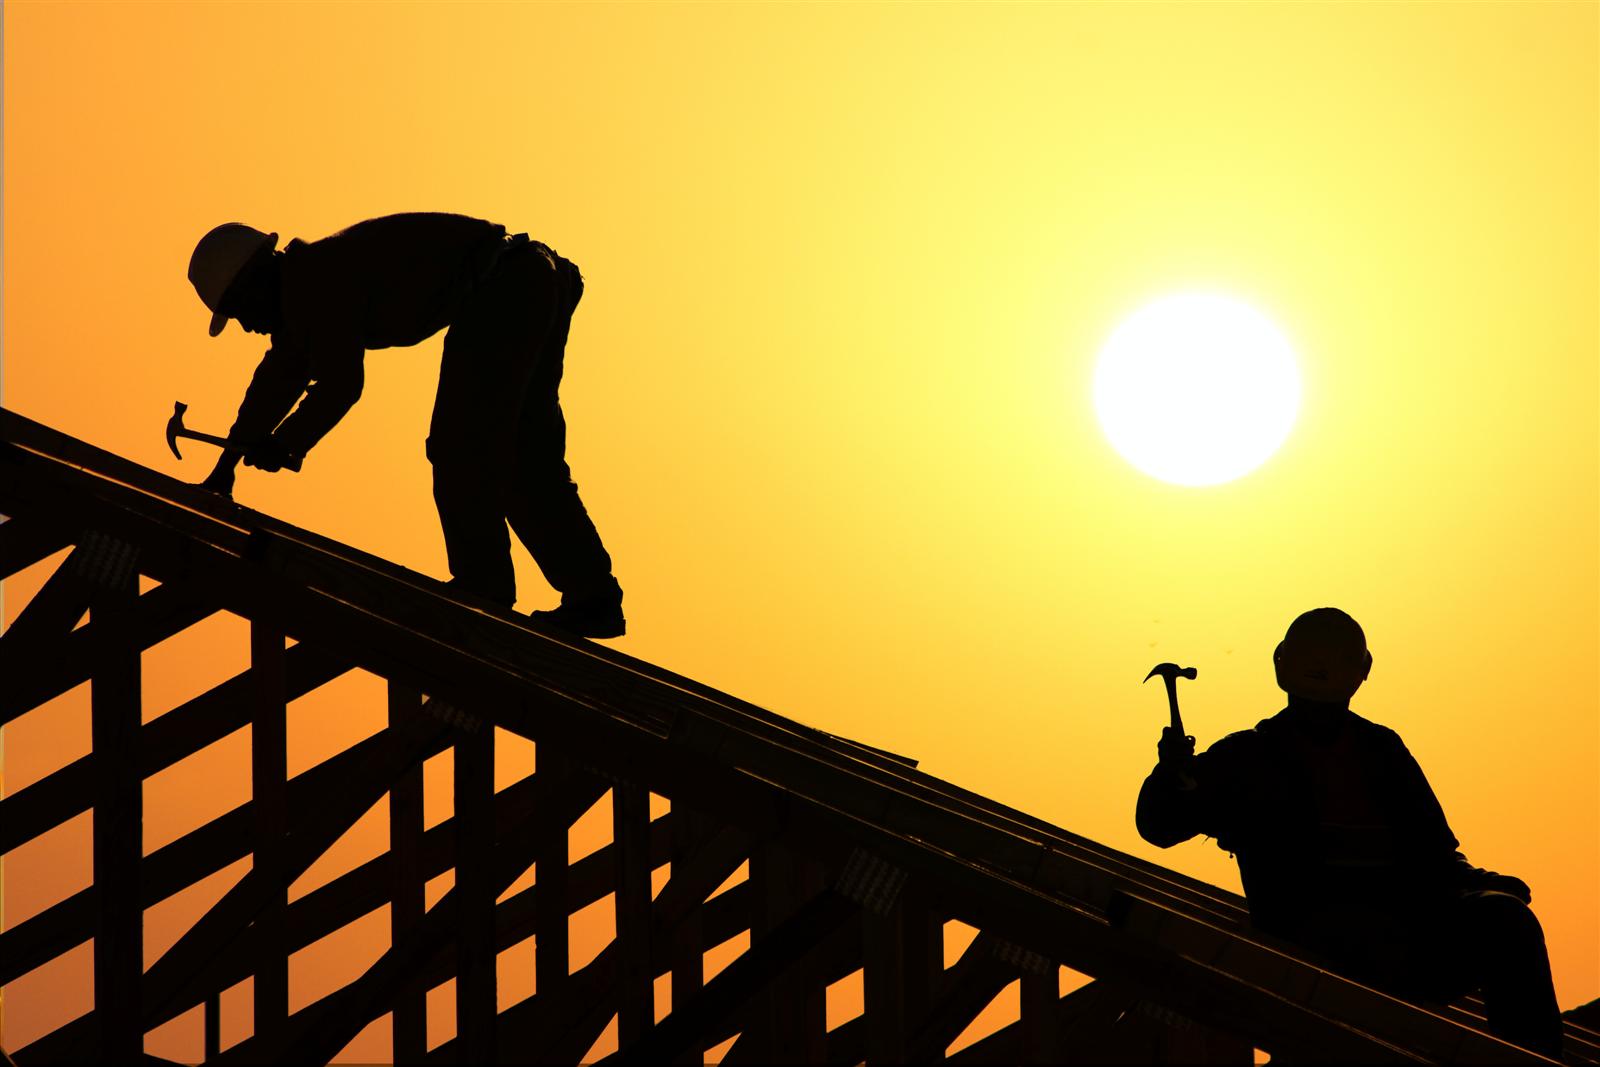 image of two roofers on top of roof with sun setting